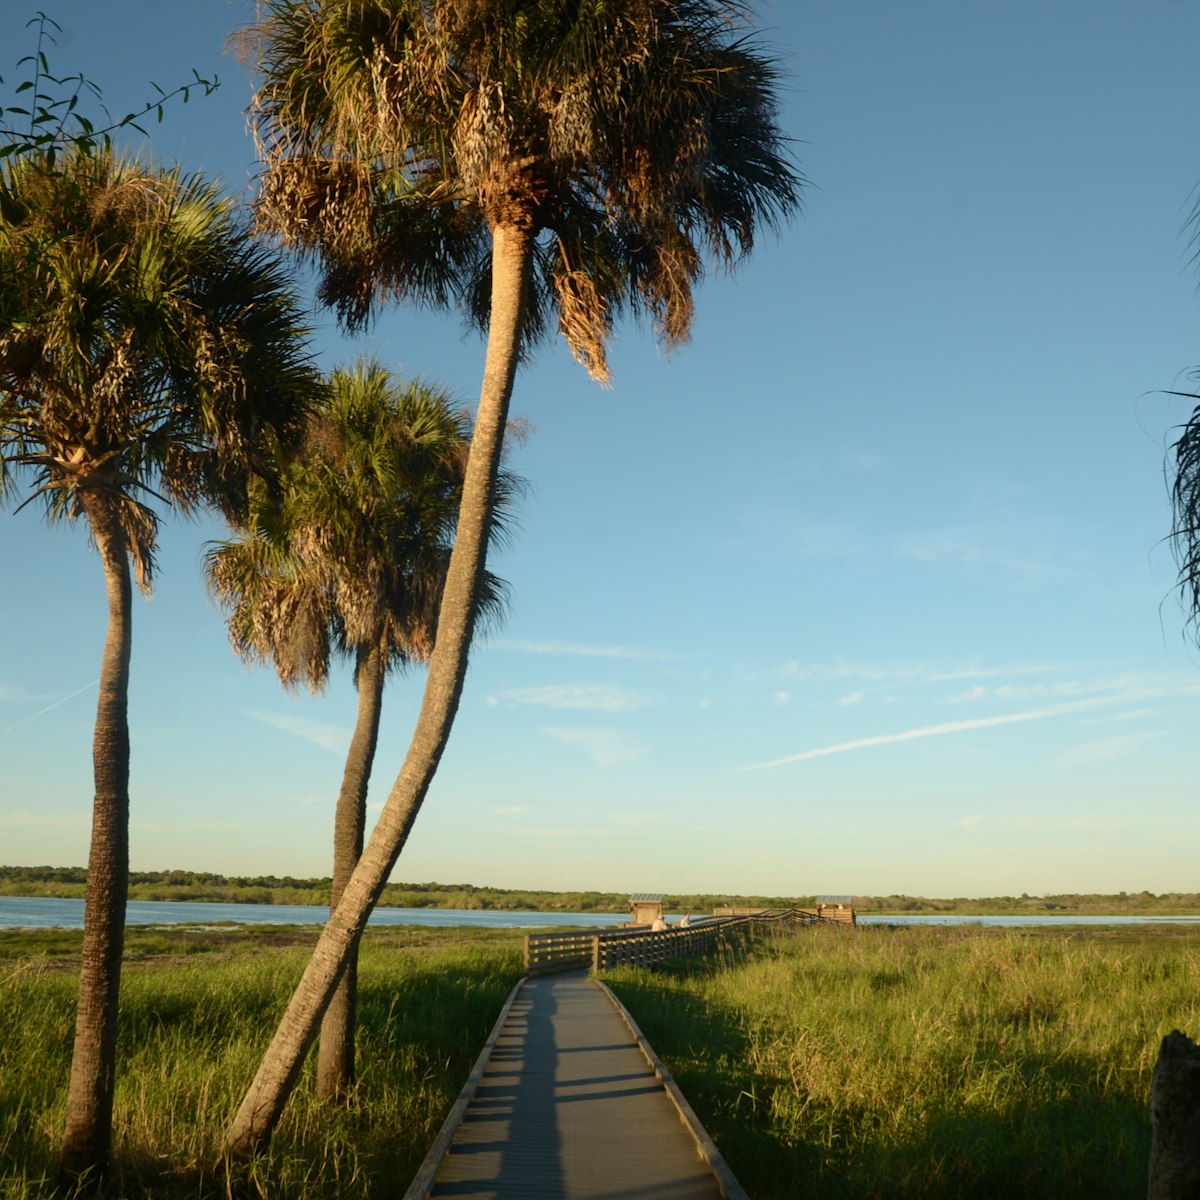 People walk on a boar walk in Myakka State Park, in Sarasota, Florida. (Photo by: Education Images/UIG via Getty Images)